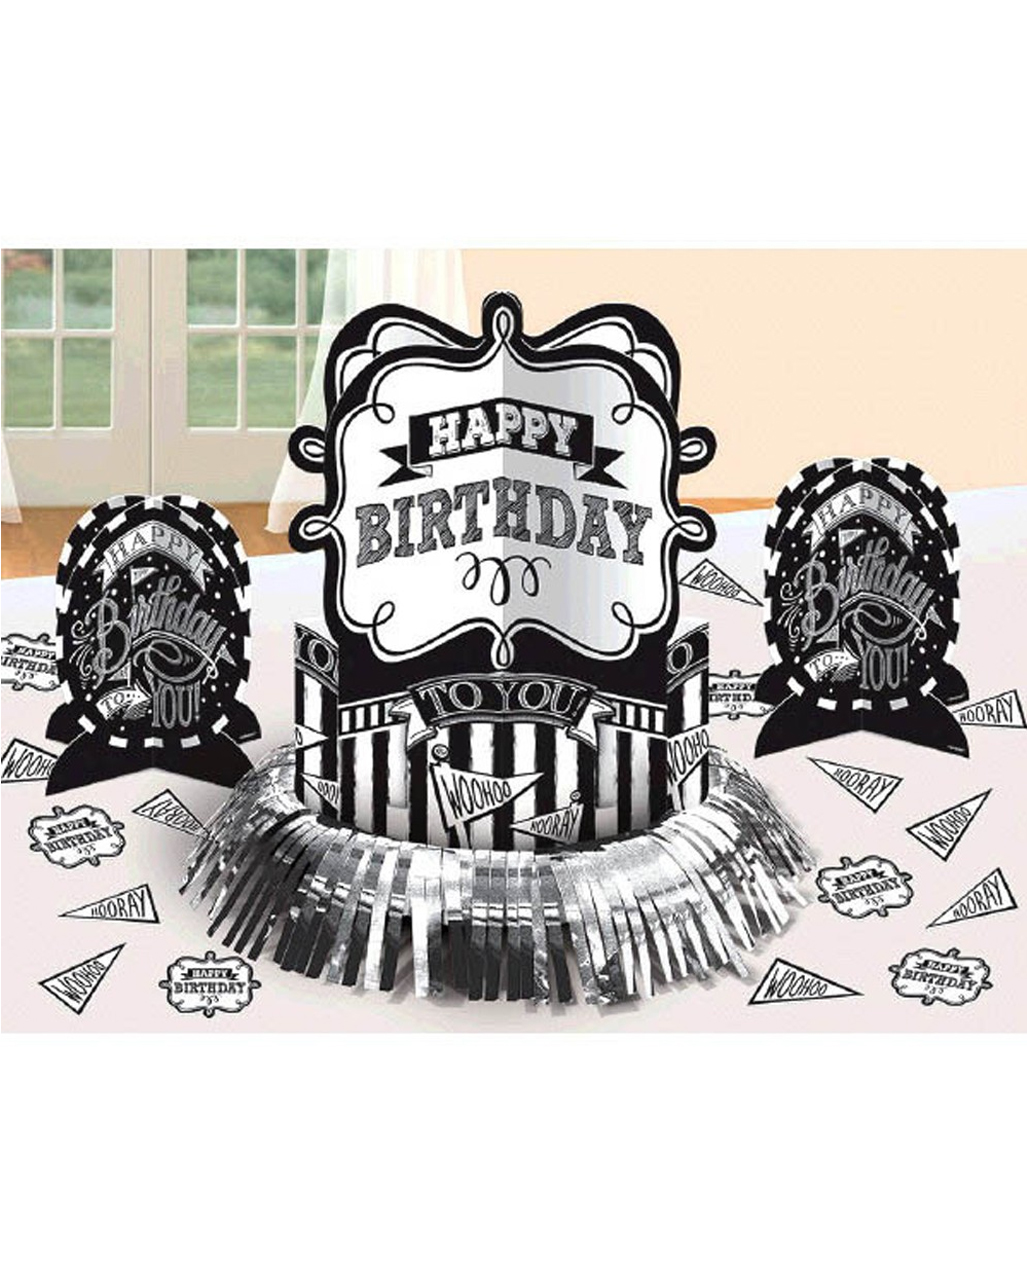 Happy Birthday Images In Black And White / Design your very own